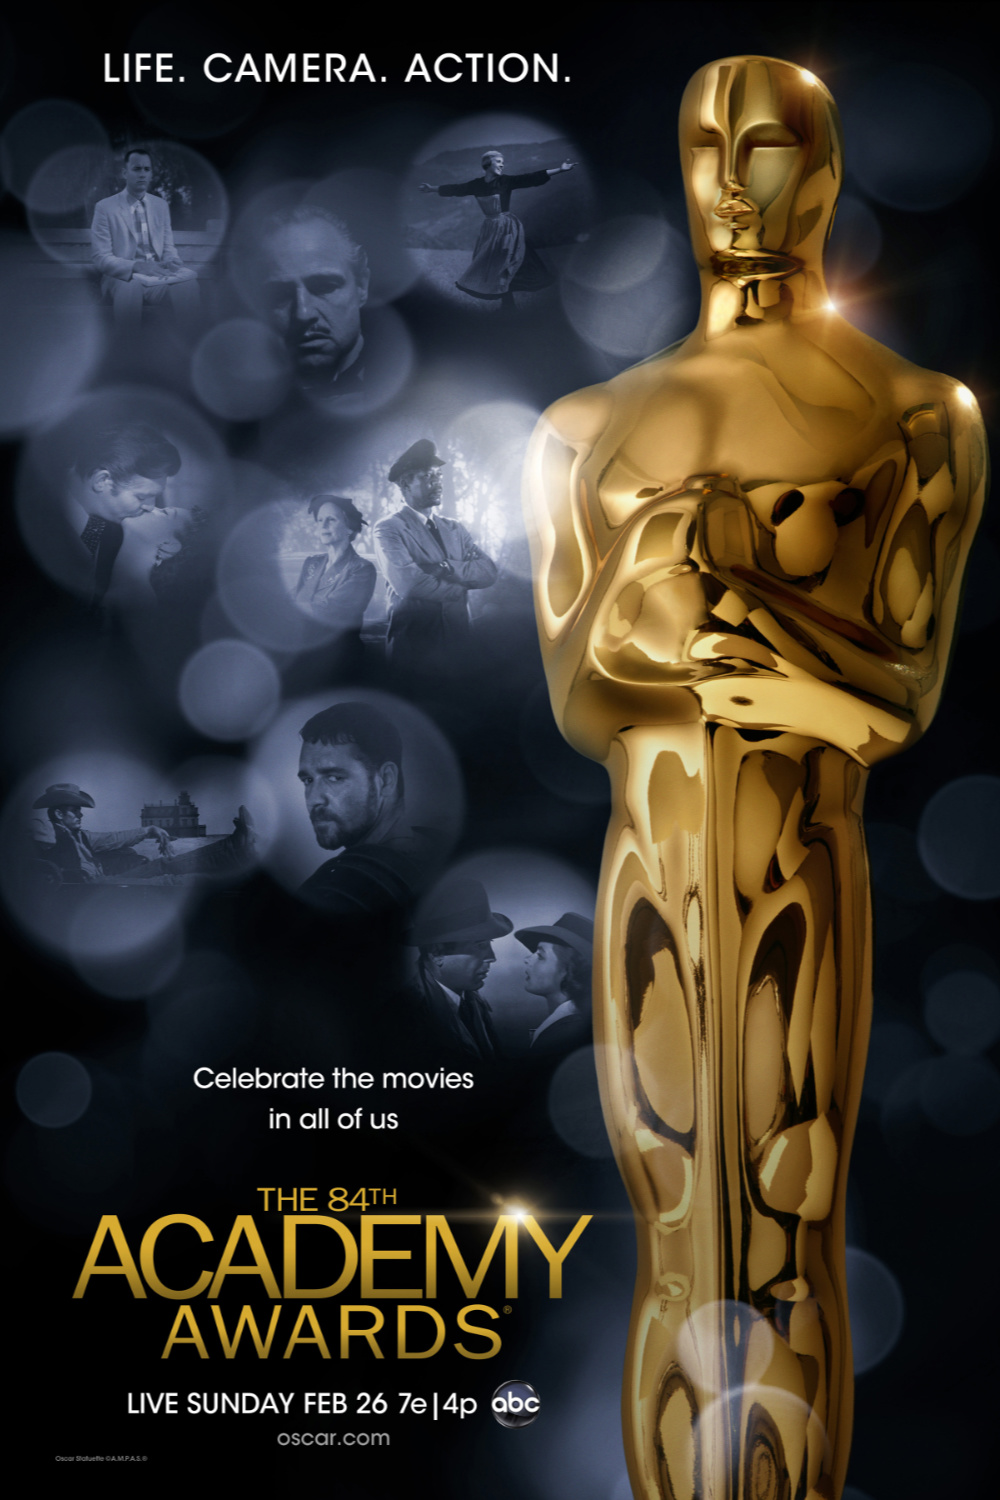 Celebrate the Music - The 84th Academy Awards